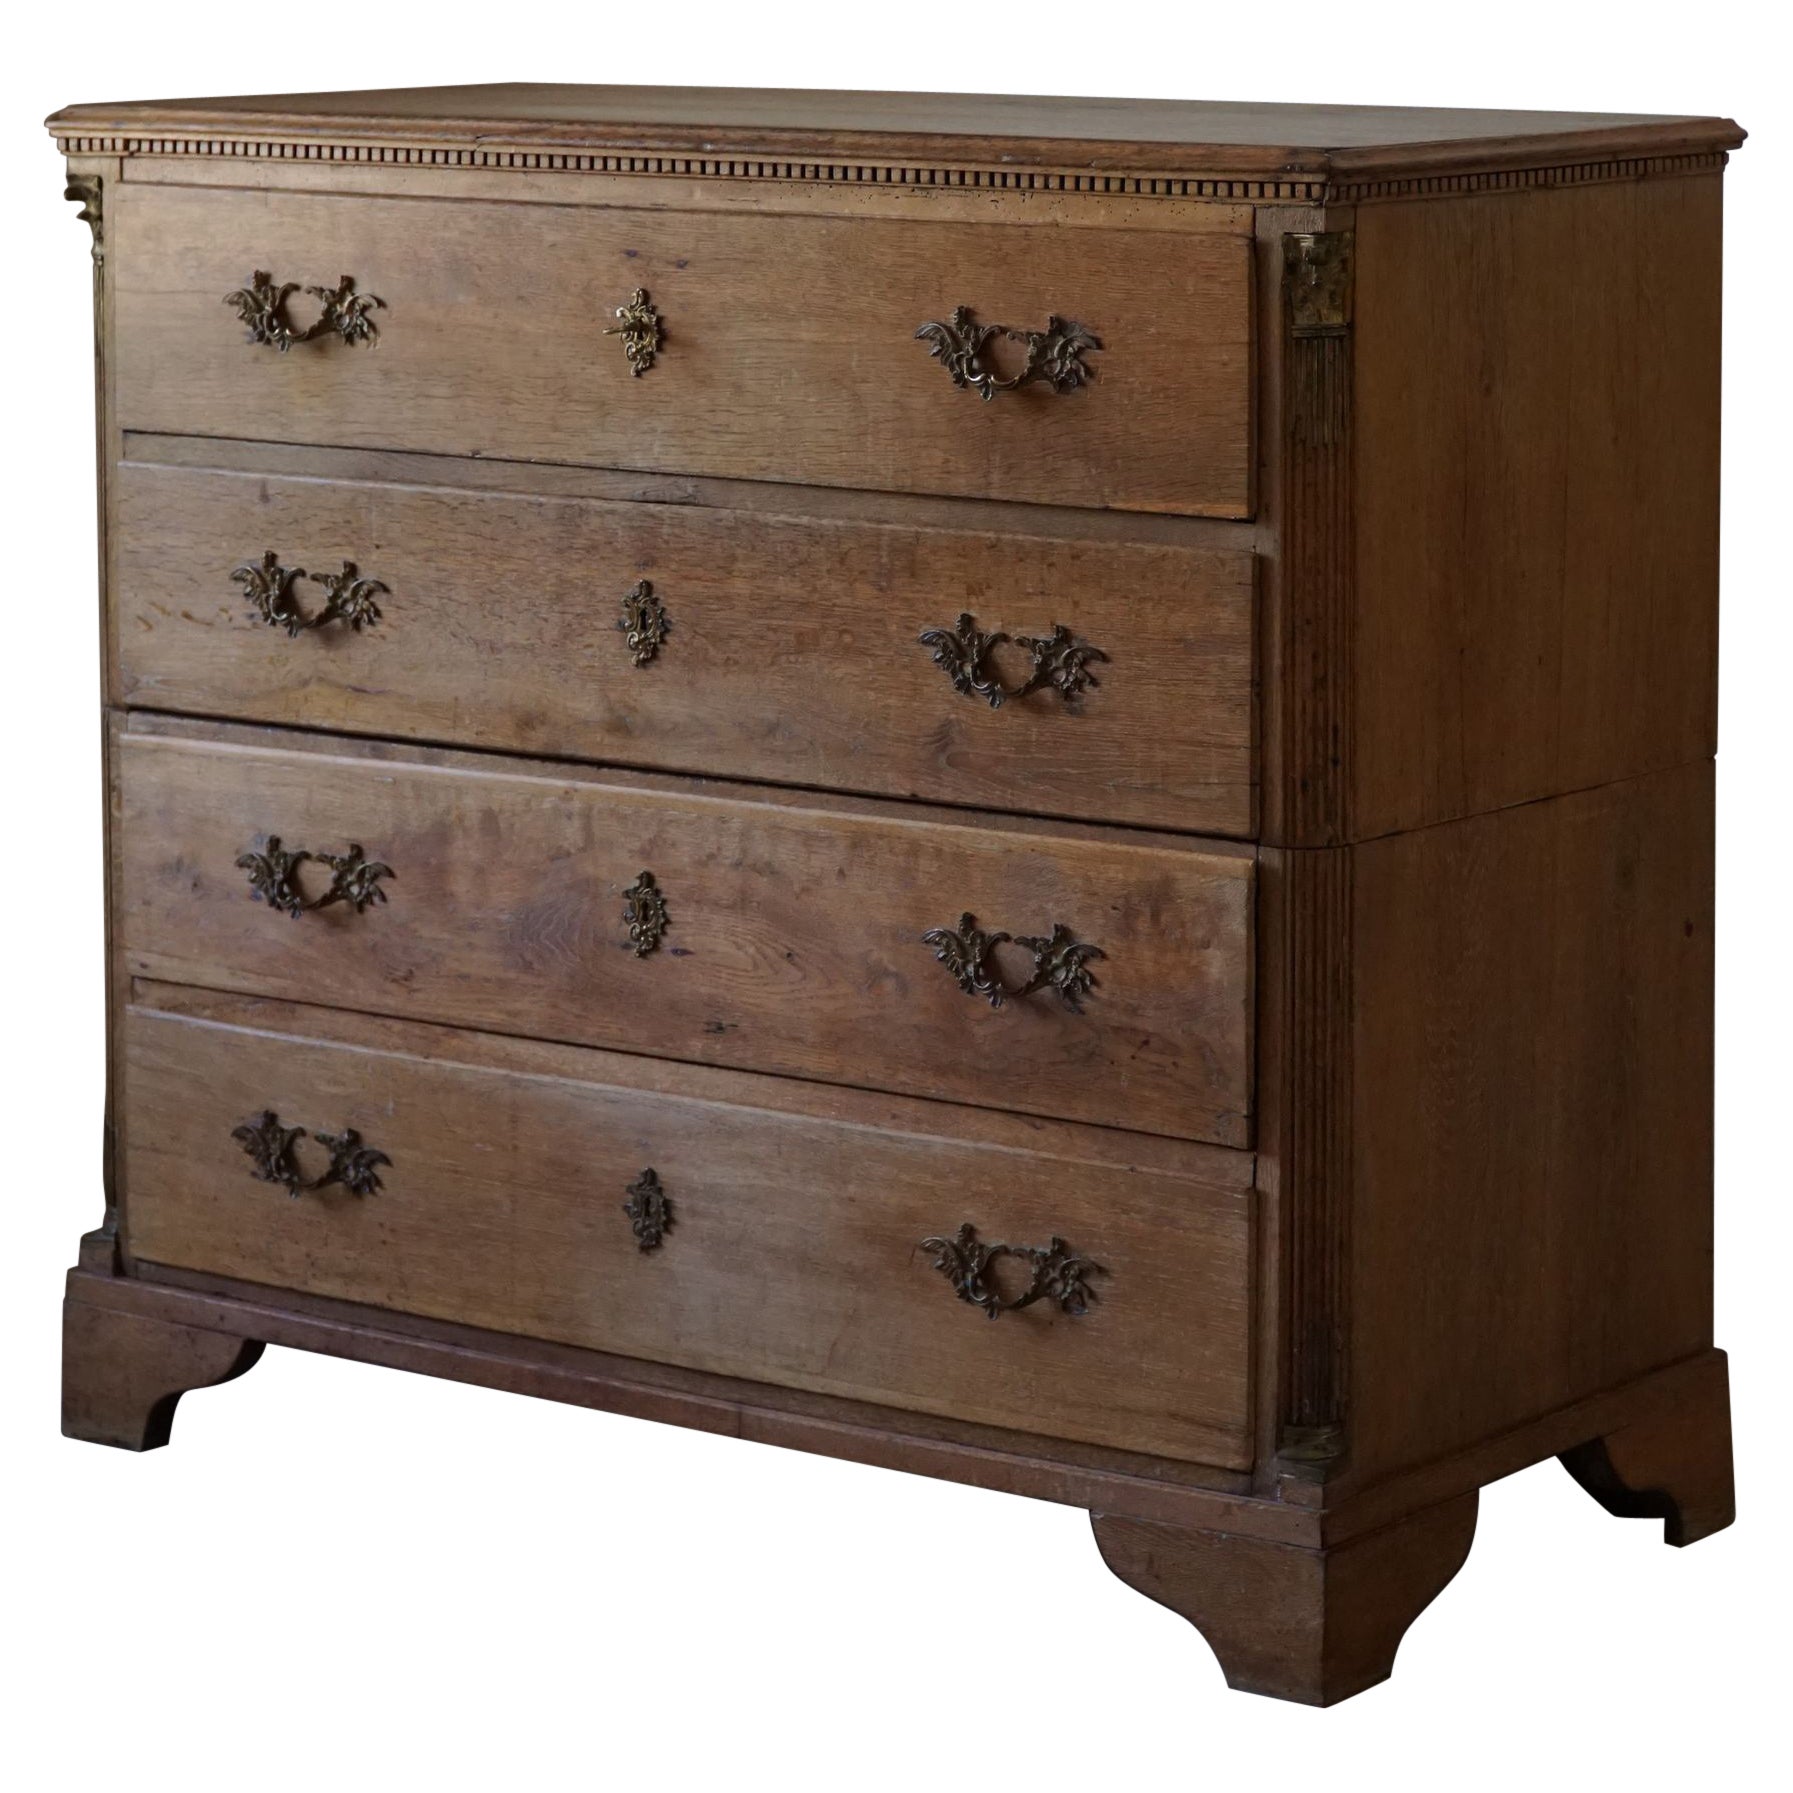 Antique Chest of Drawers in Oak, Made in Denmark, Mid-19th Century